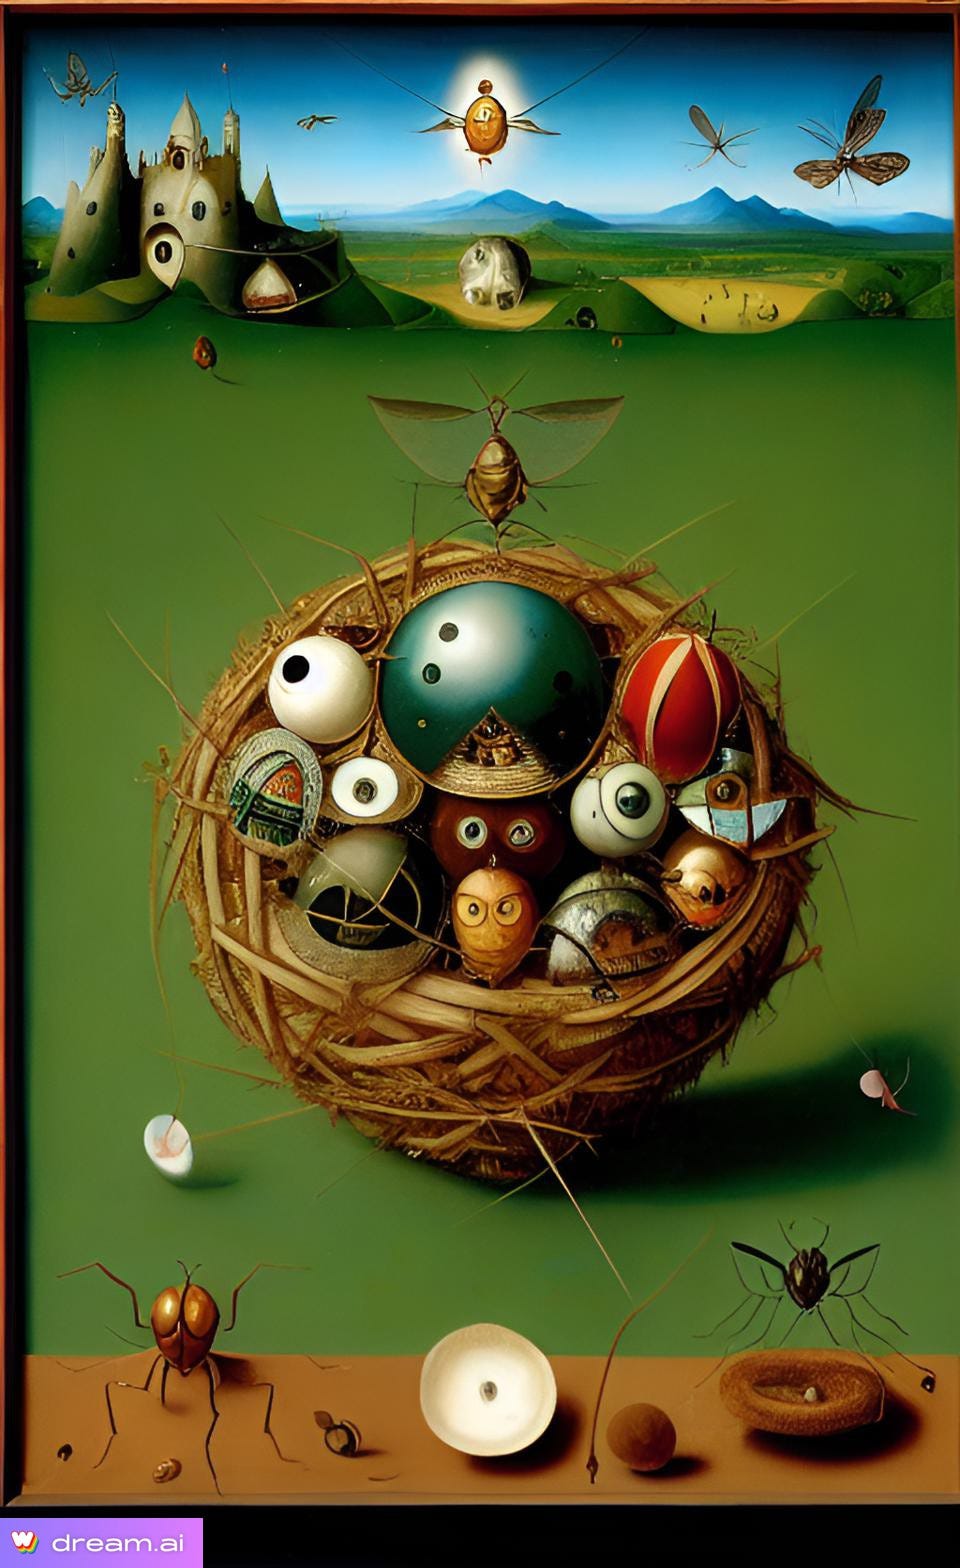 A.I. image in absurdist-surrealist style depicting whimsical bug-like things in and around a bird's nest